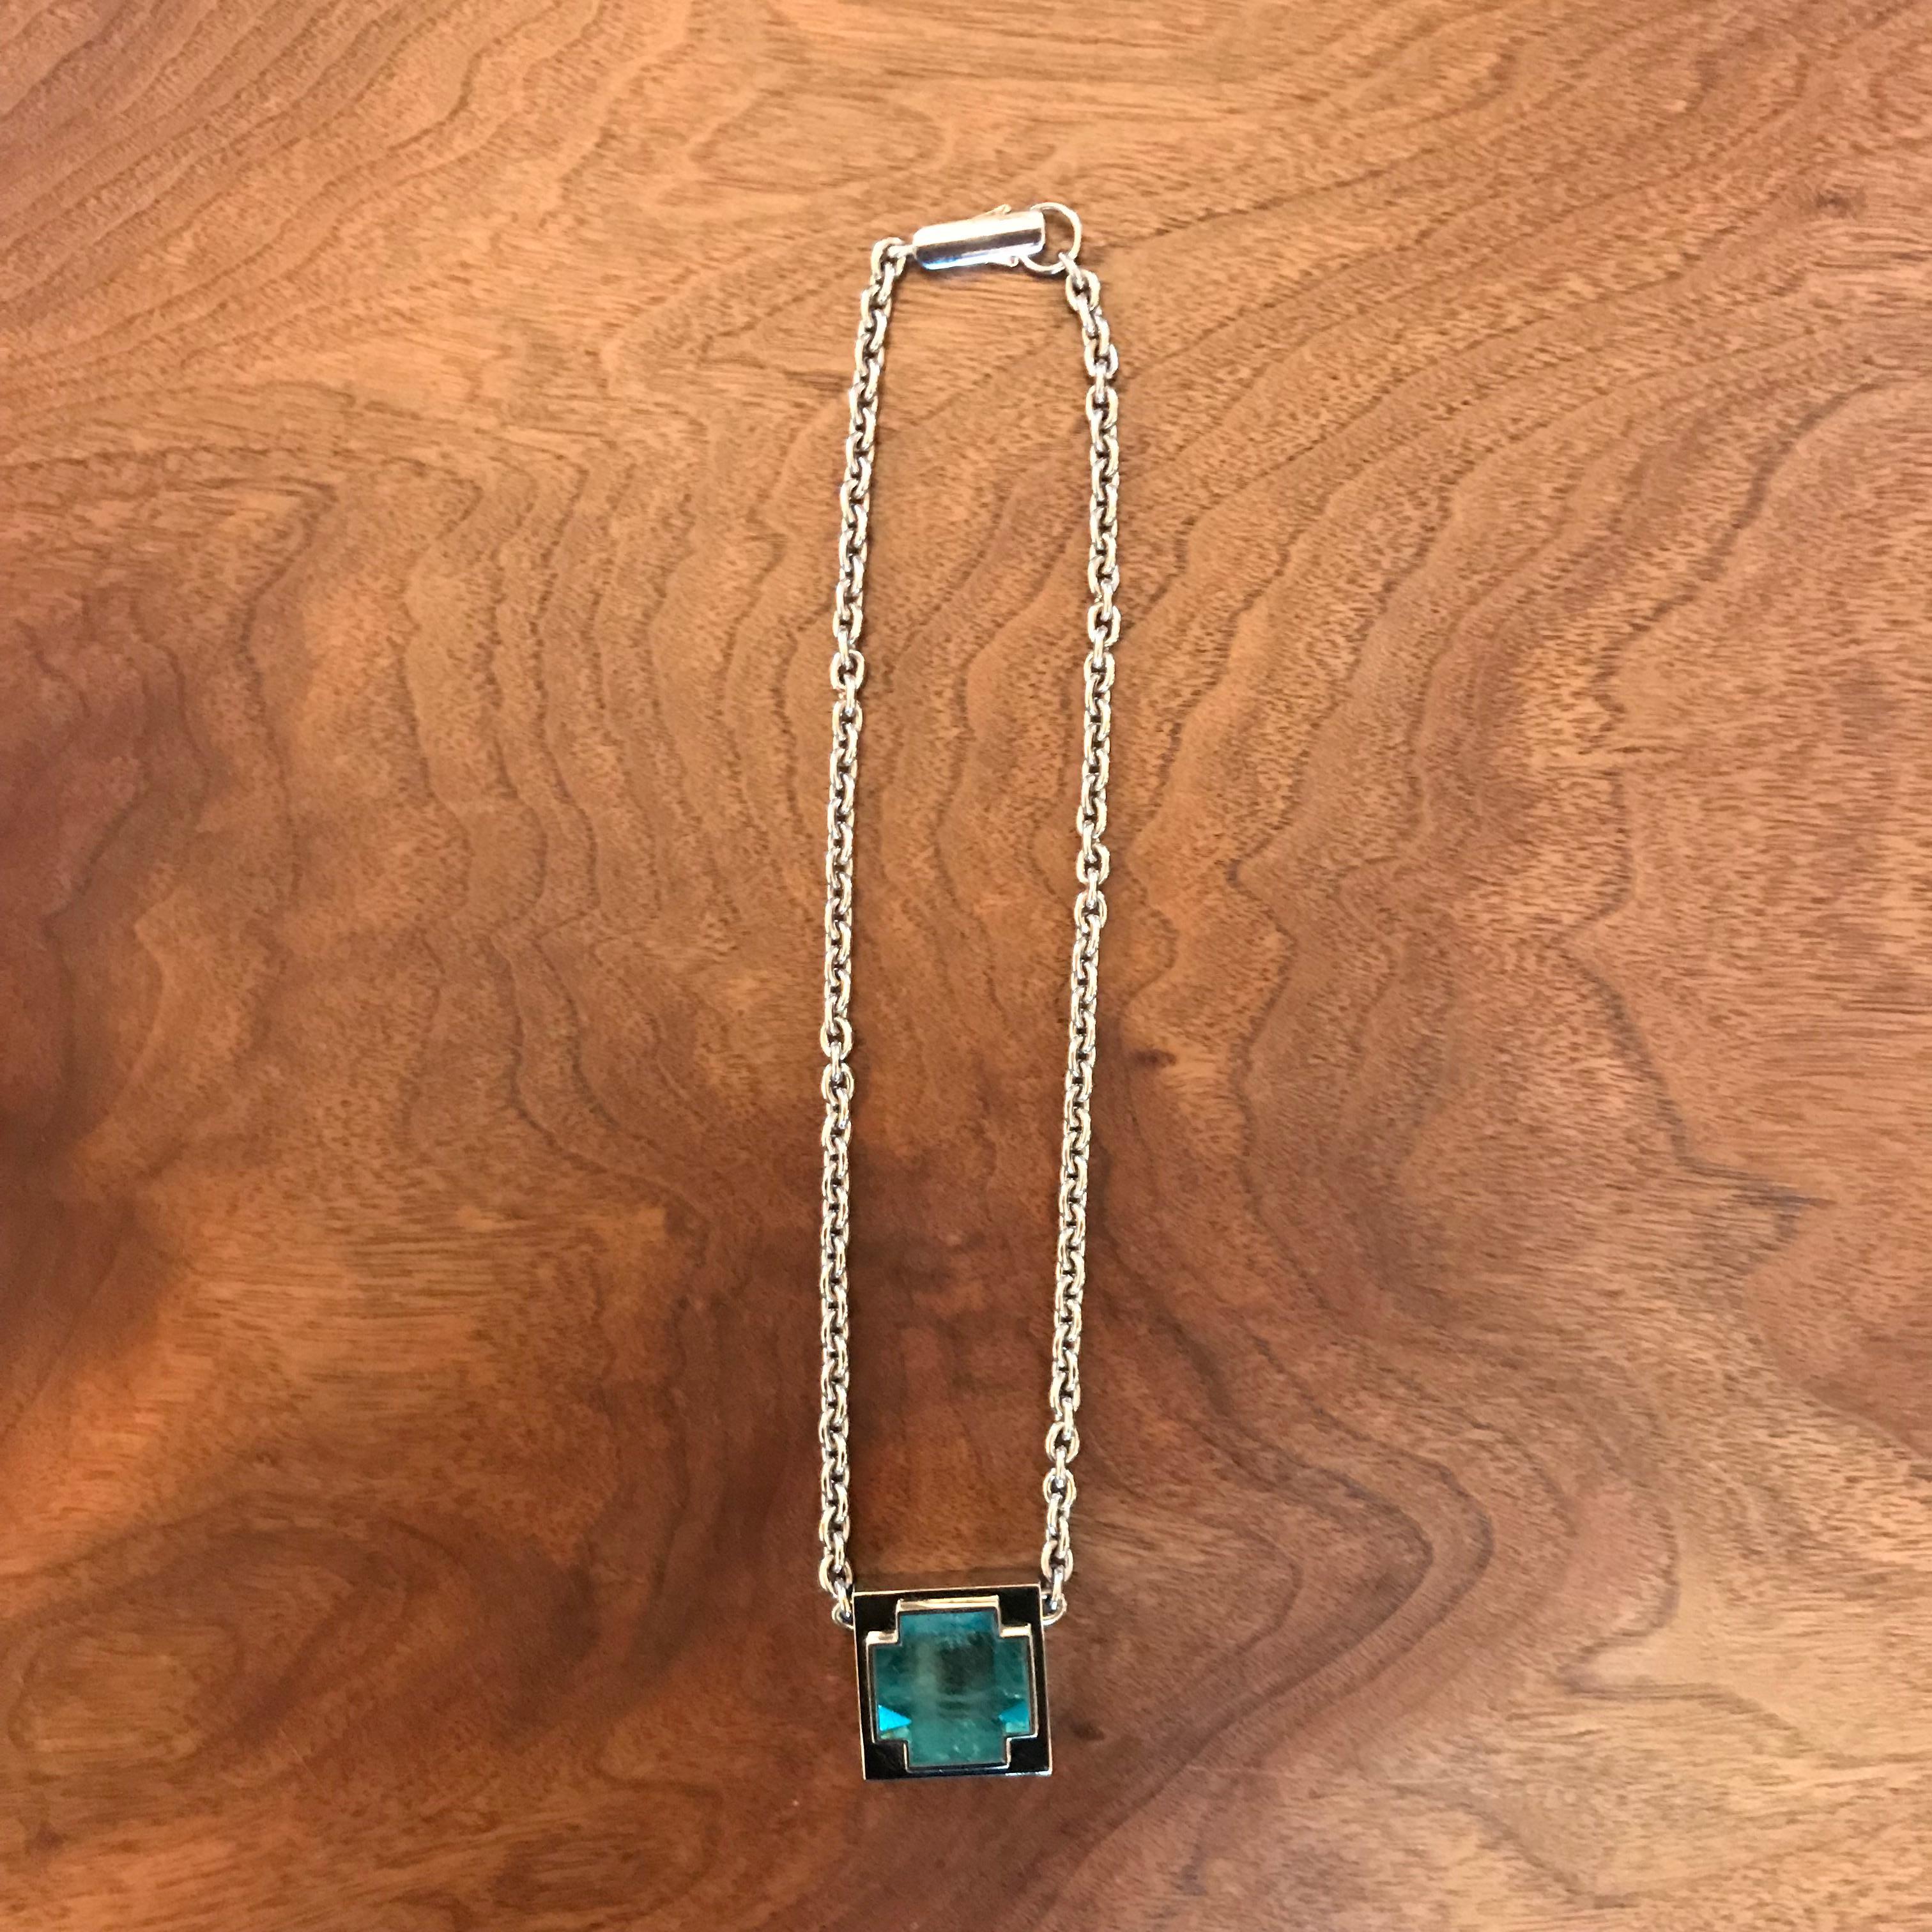 An extraordinary aquamarine 48.66 ct wonderful placed in this beautiful center of a 18 Karat white gold linking chain necklace.
An impressive contemporary piece of jewellery that really makes a statement. 